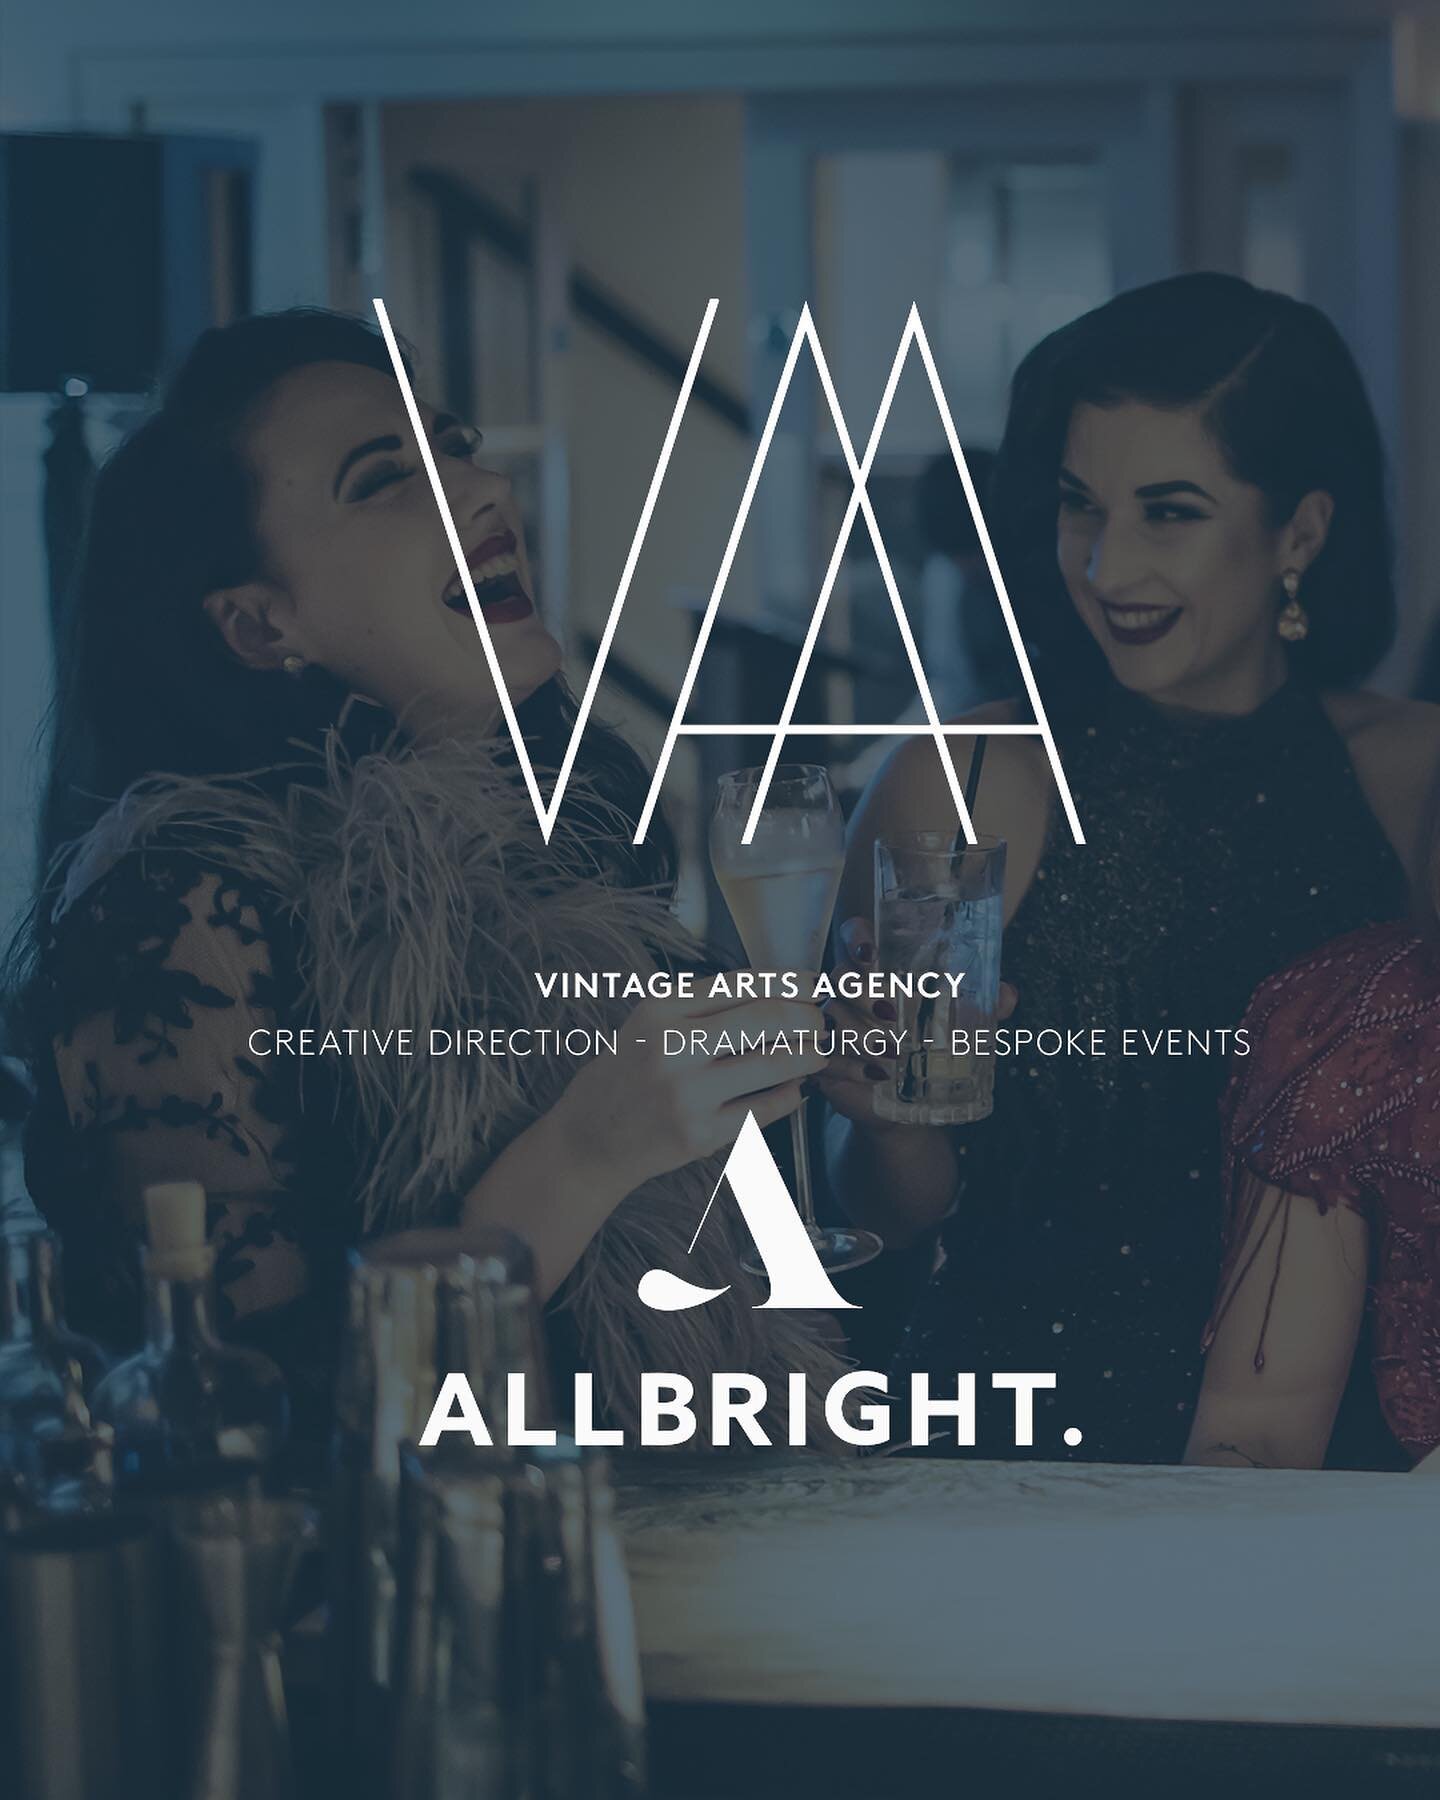 VINTAGE ARTS AGENCY x ALLBRIGHT COLLECTIVE

Scaling to suit your specific venue and eventspace needs is one of our specialities at VAA. Whilst we love working on a grand scale, sometimes the most magical moments are those created in the most intimate